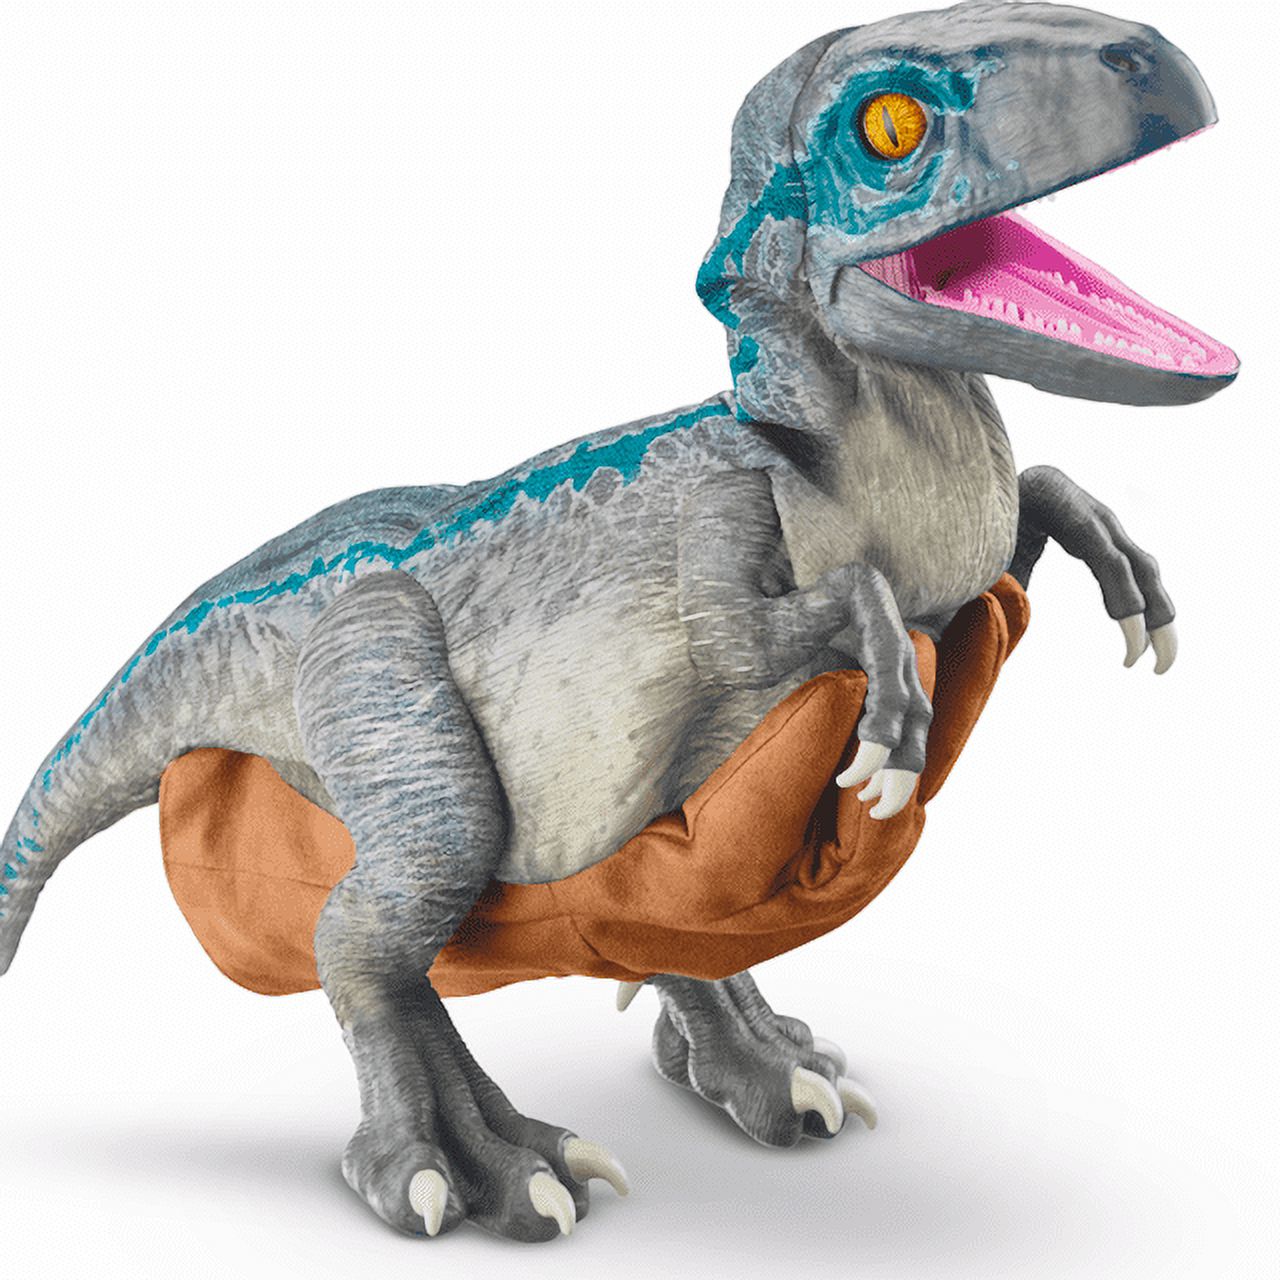 Jurassic World REALFX Baby Blue | Hyper-Realistic Dinosaur Animatronic Puppet Toy | Life-like Movements and Real Movie Sounds | Jurassic World Dominion Official Gifts, Collectables and Toys - image 1 of 13